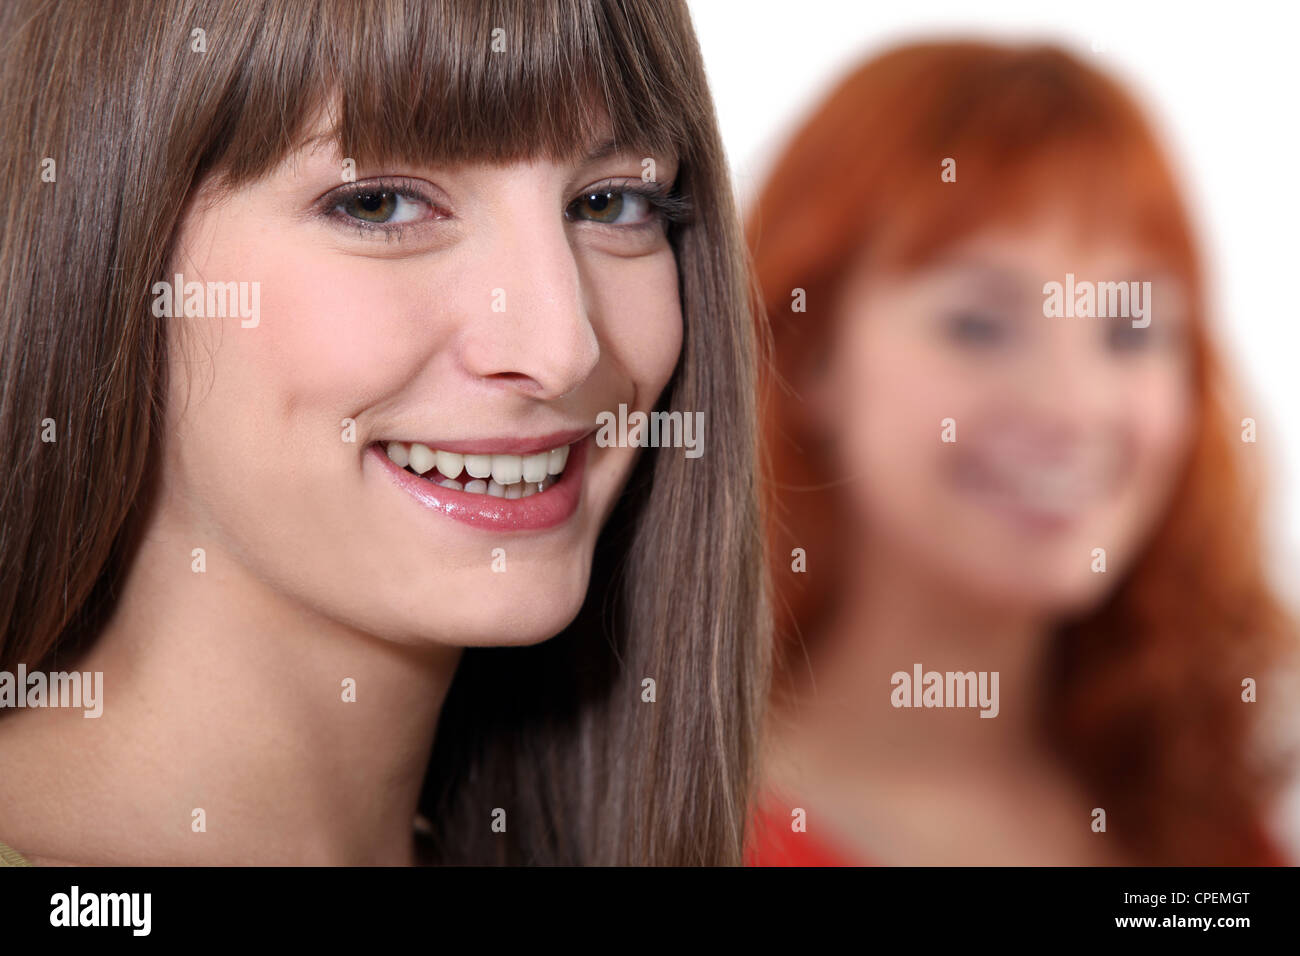 Attractive young women Stock Photo